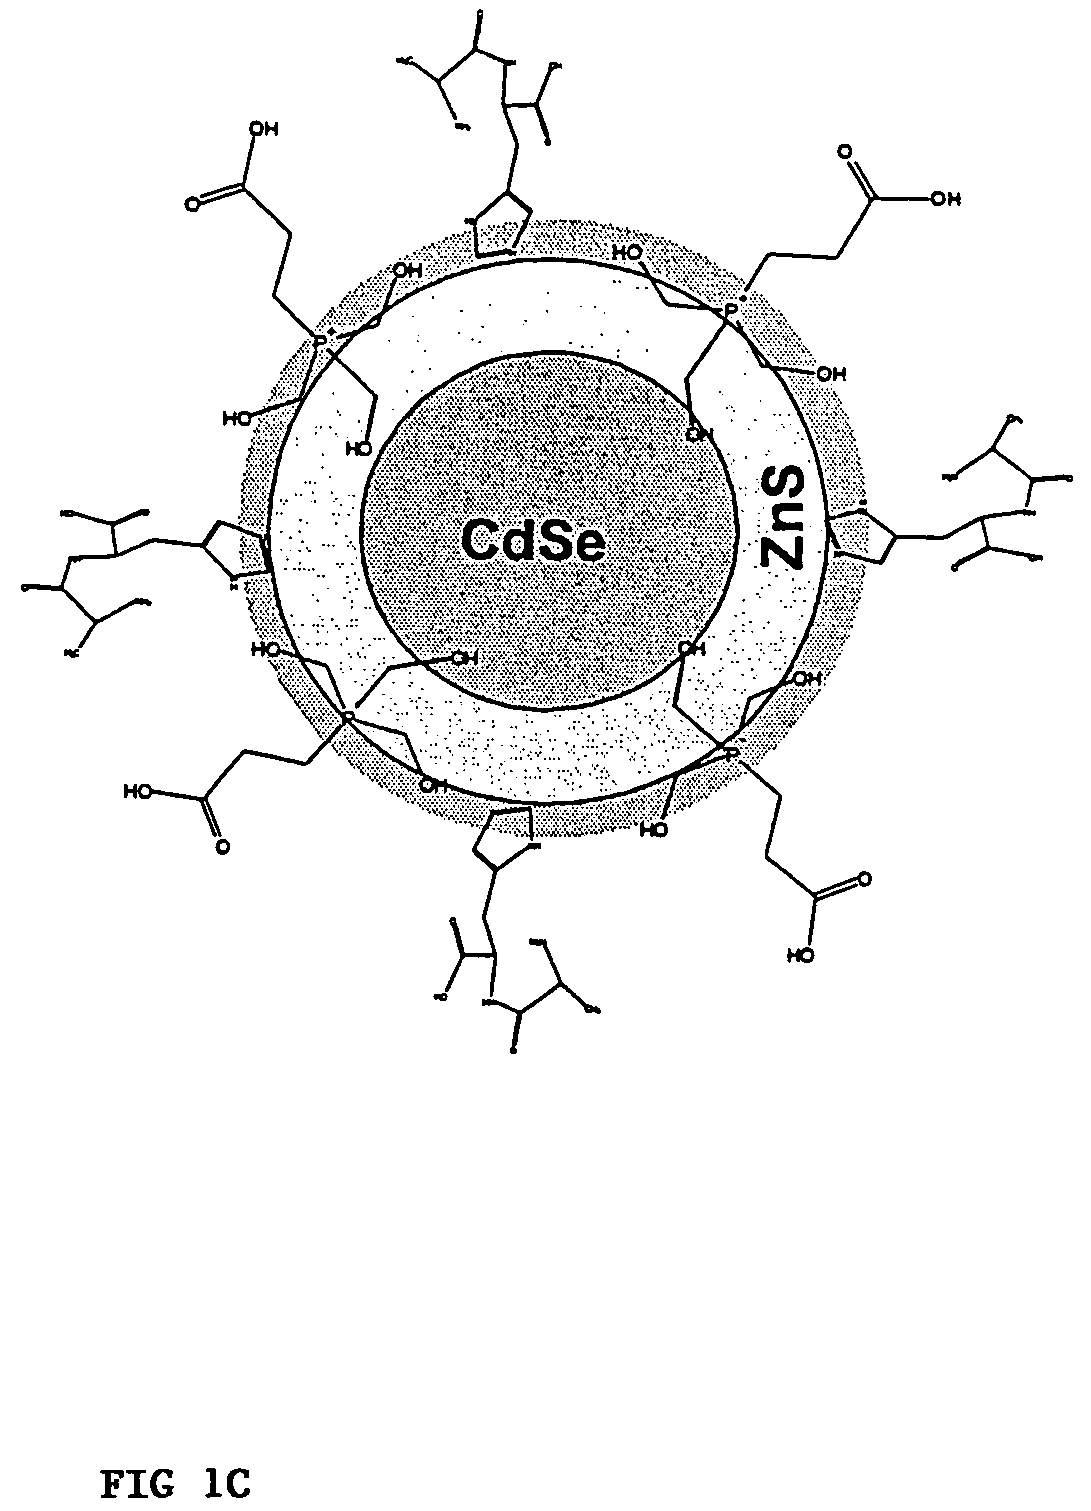 Functionalized fluorescent nanocrystal compositions and methods of making